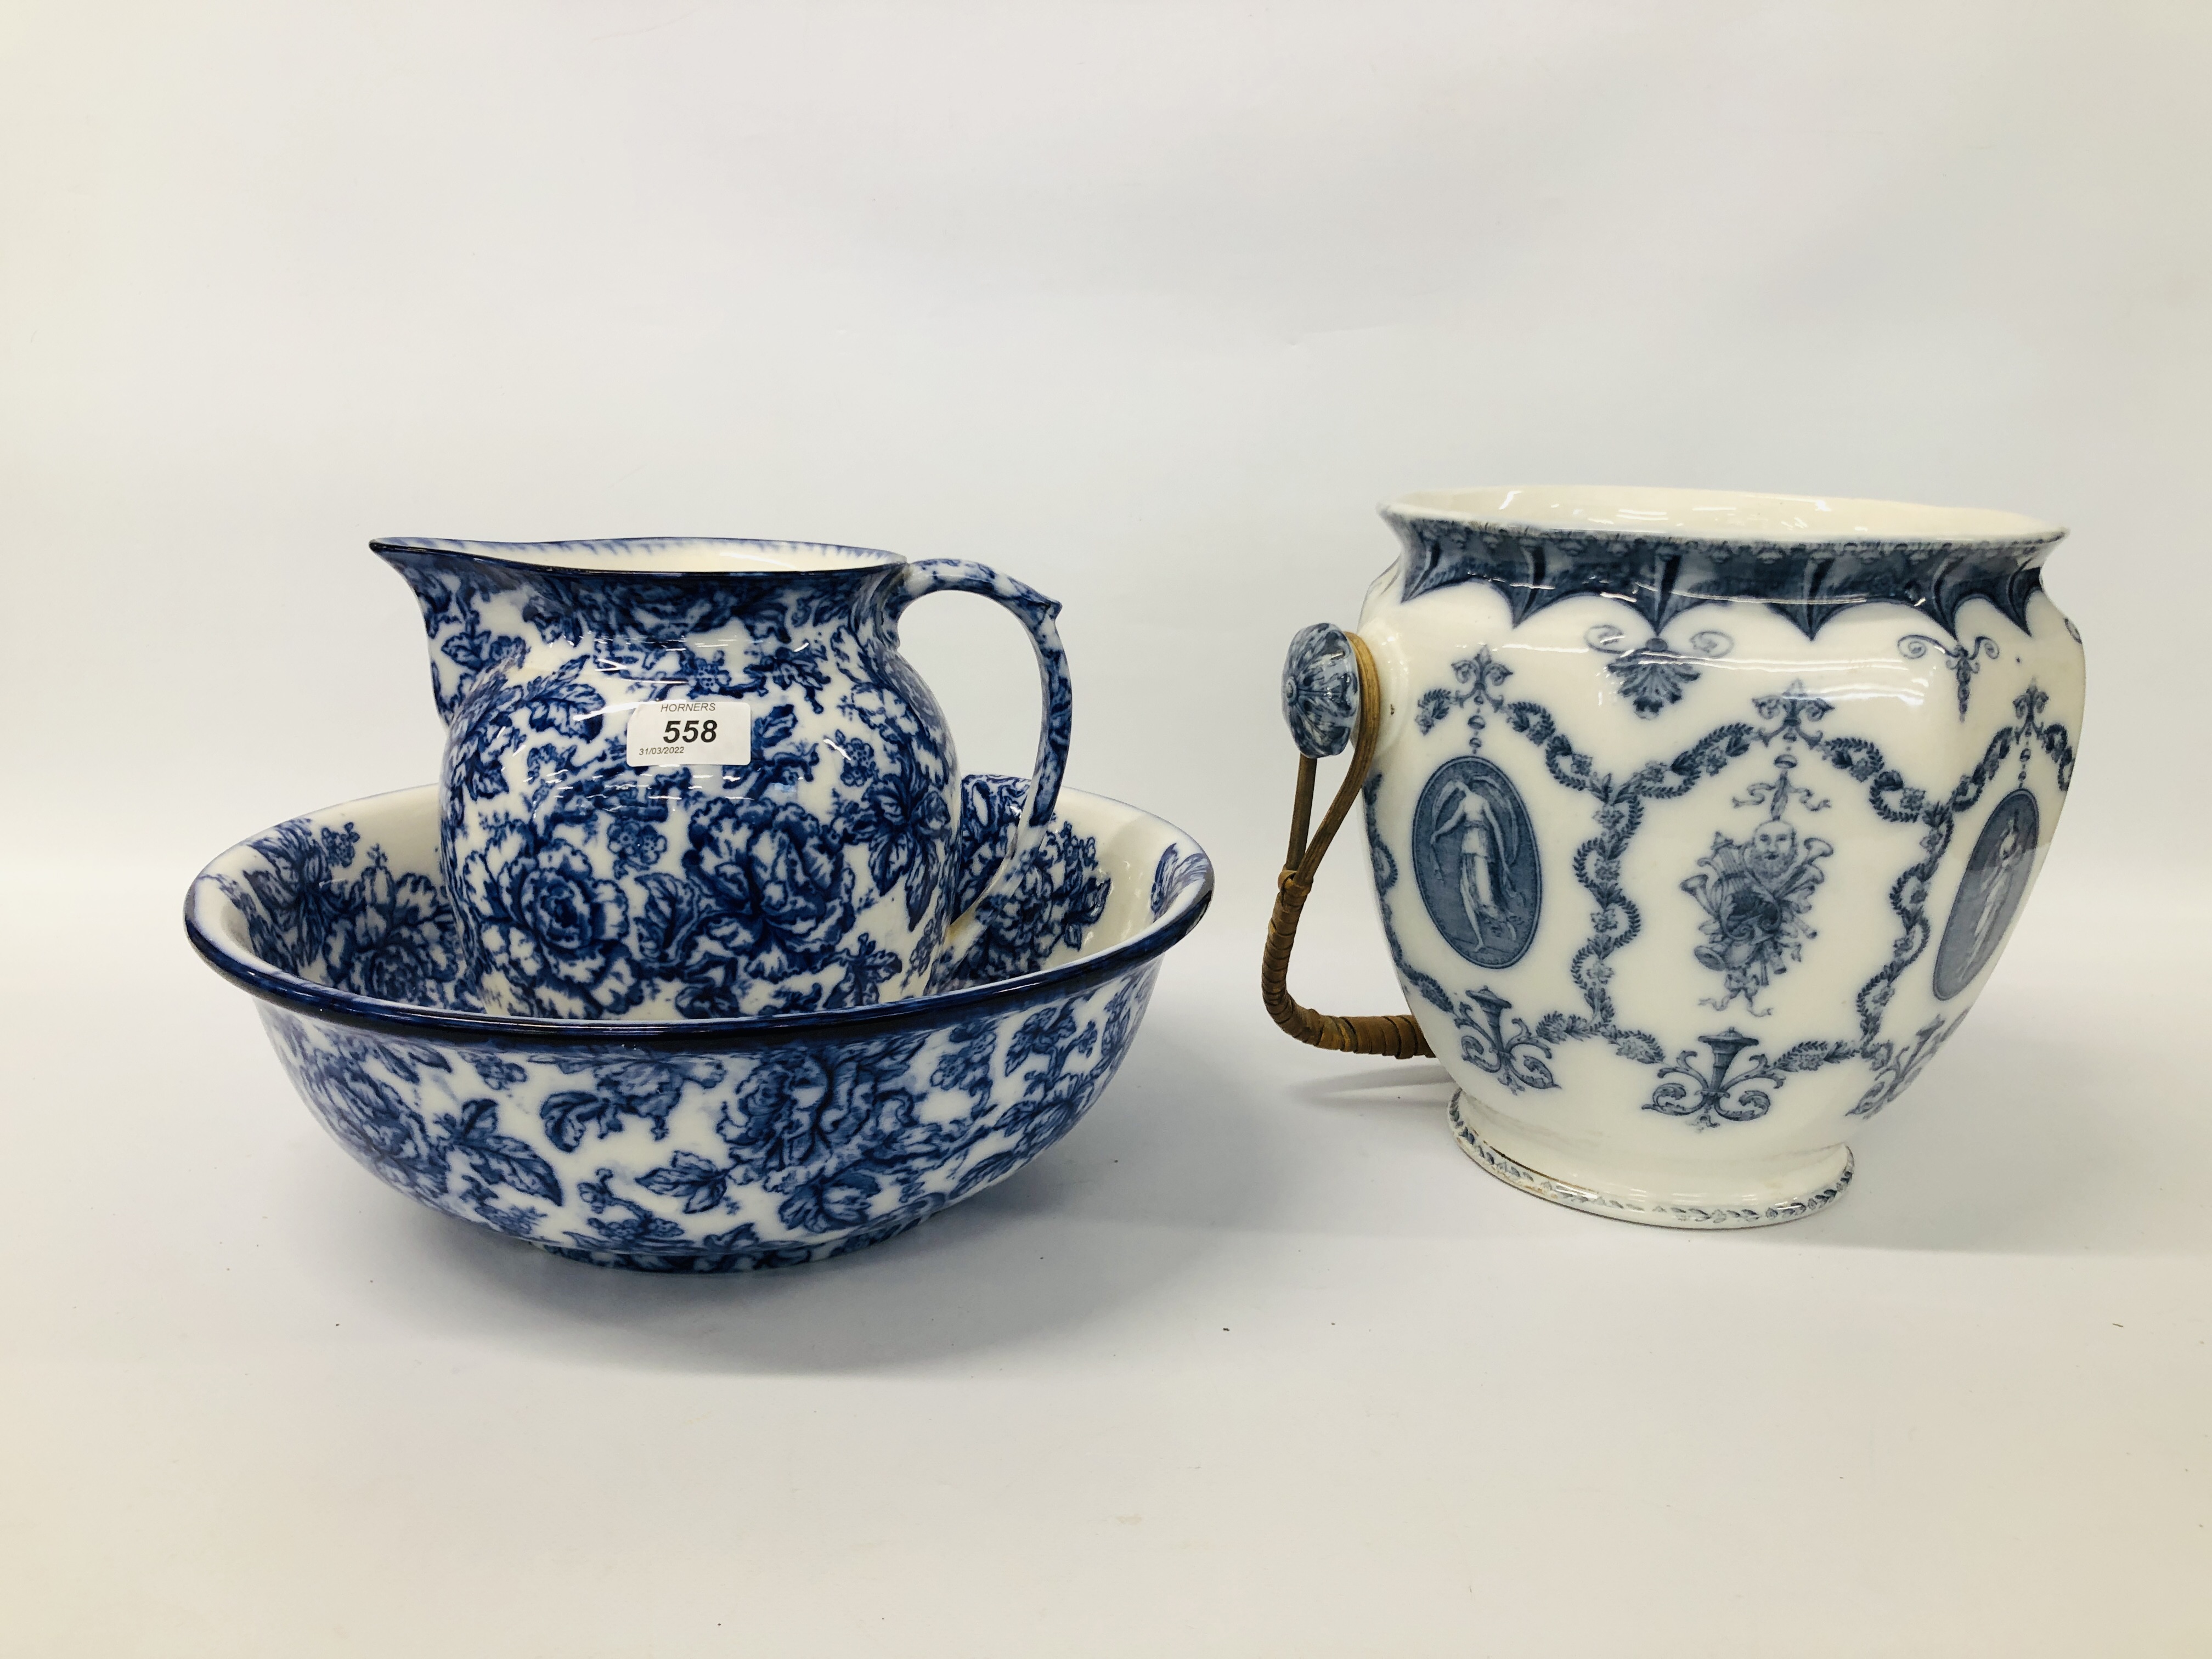 LOSOL WARE "CAVENDISH" BLUE AND WHITE ROSE DECORATED WASH JUG AND BOWL ALONG WITH A "BOOTHS"